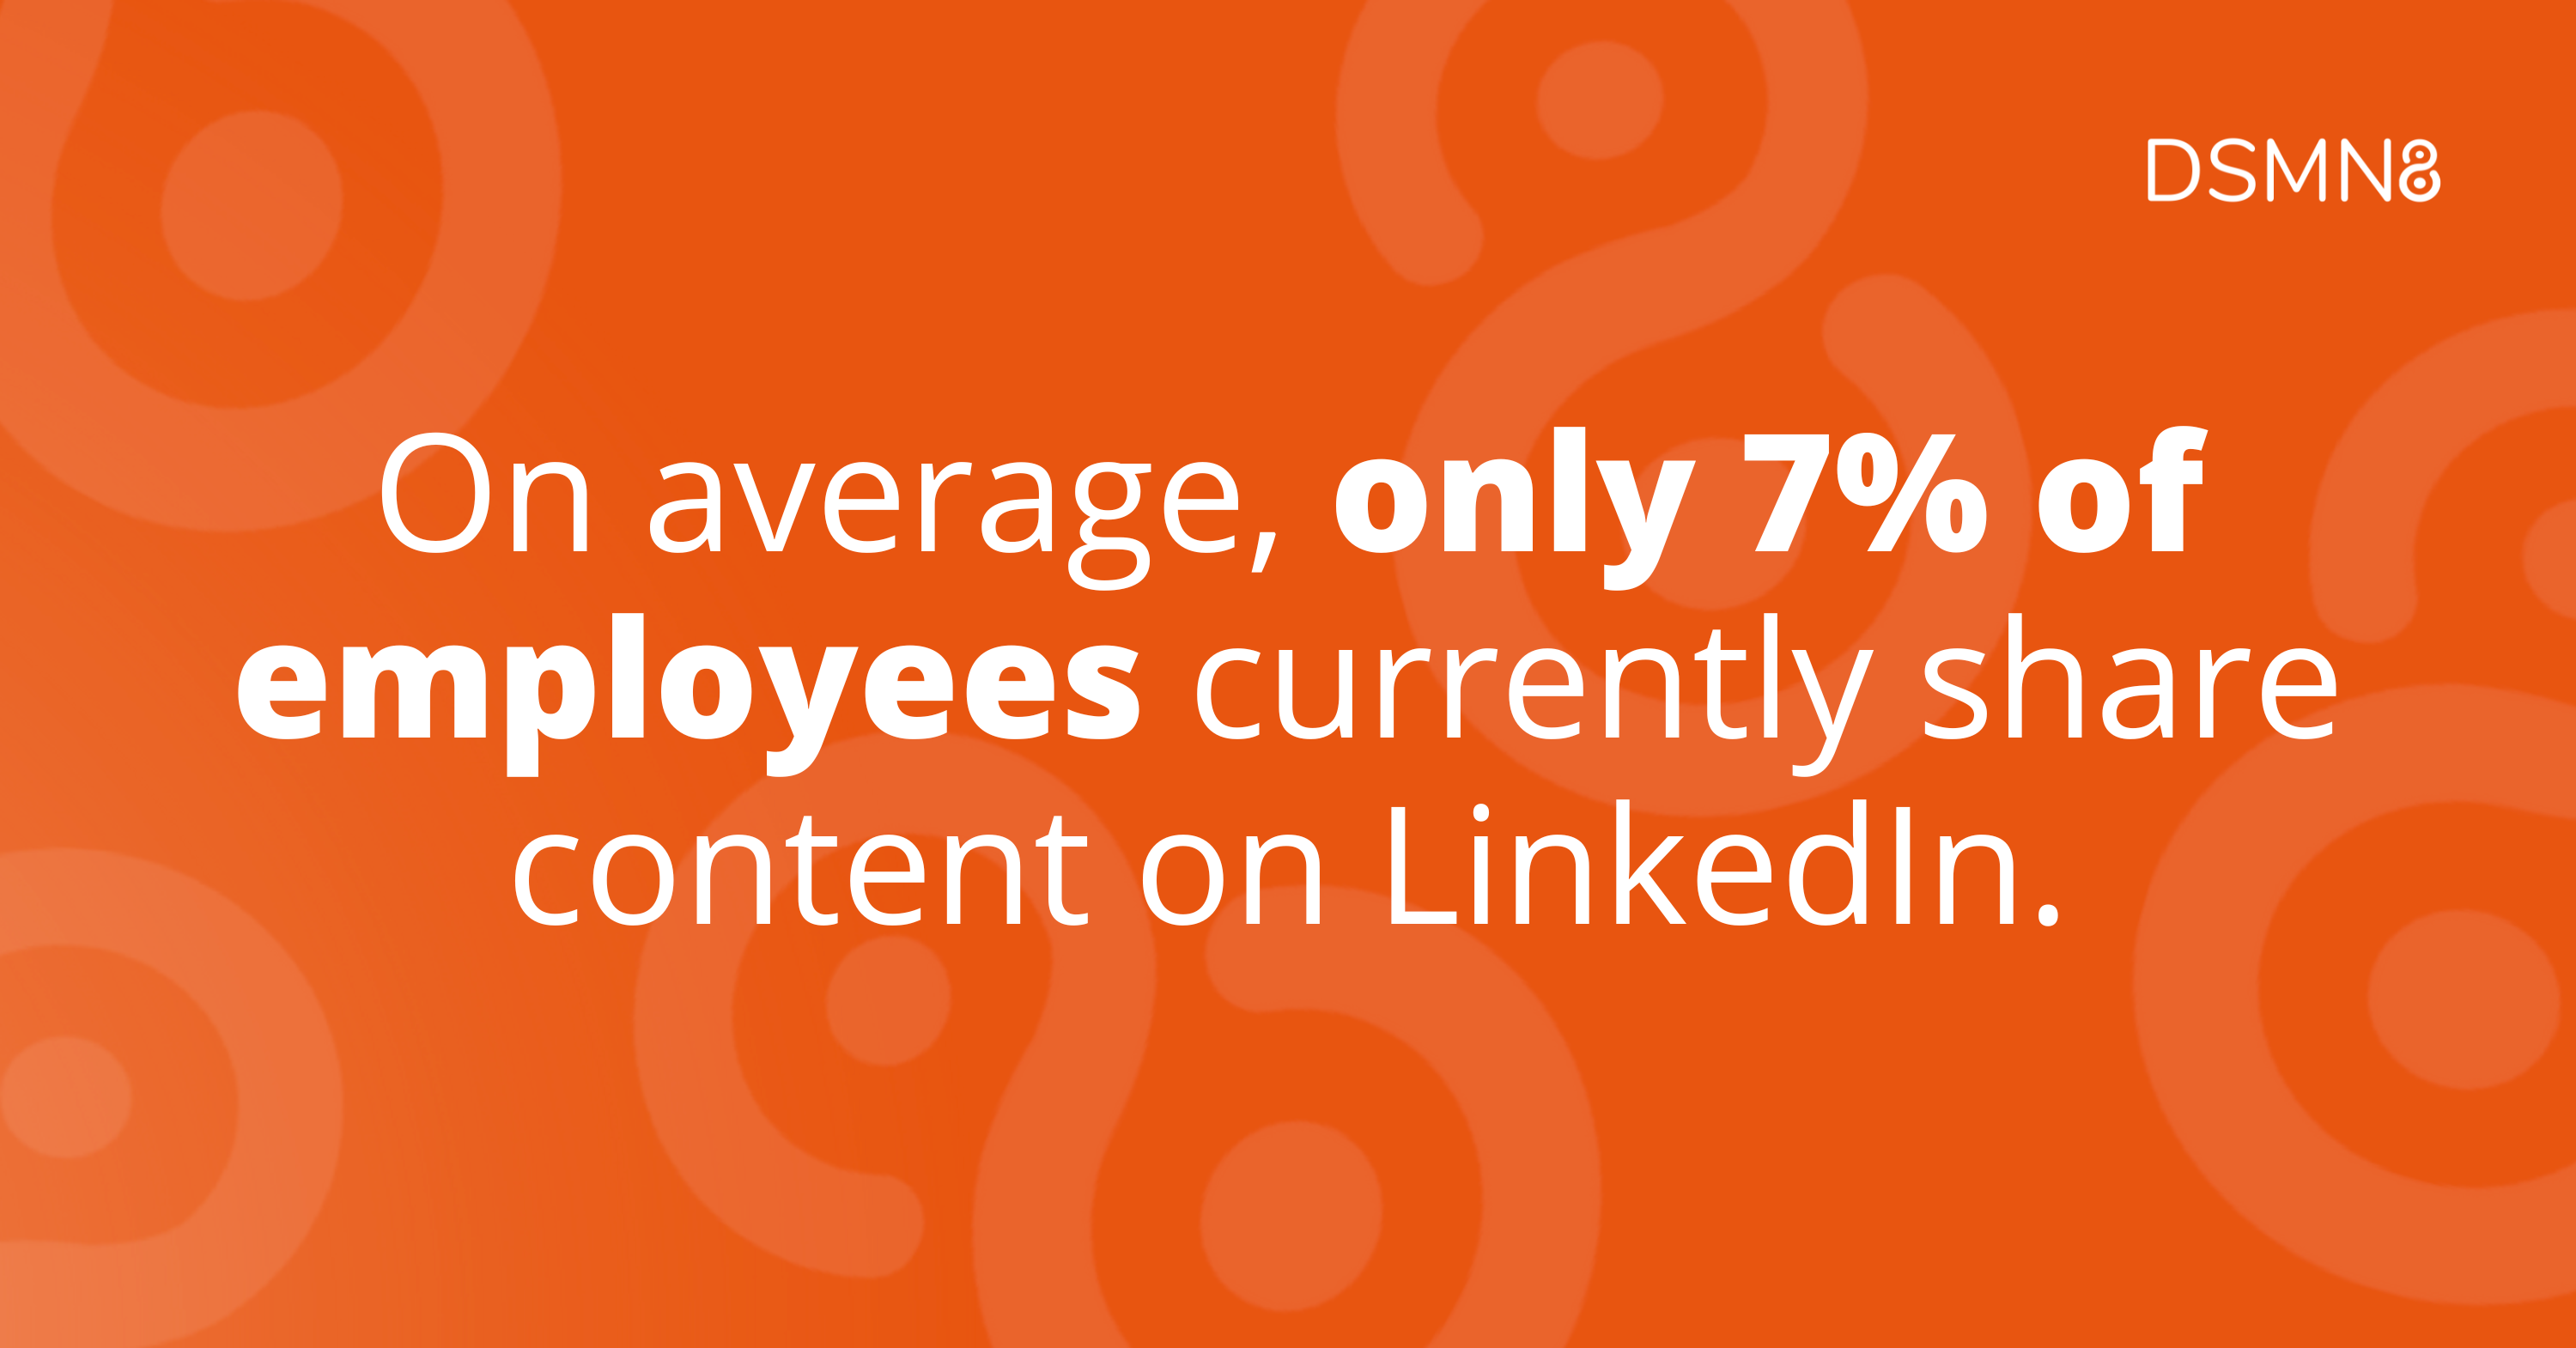 only 7% of employees currently share content